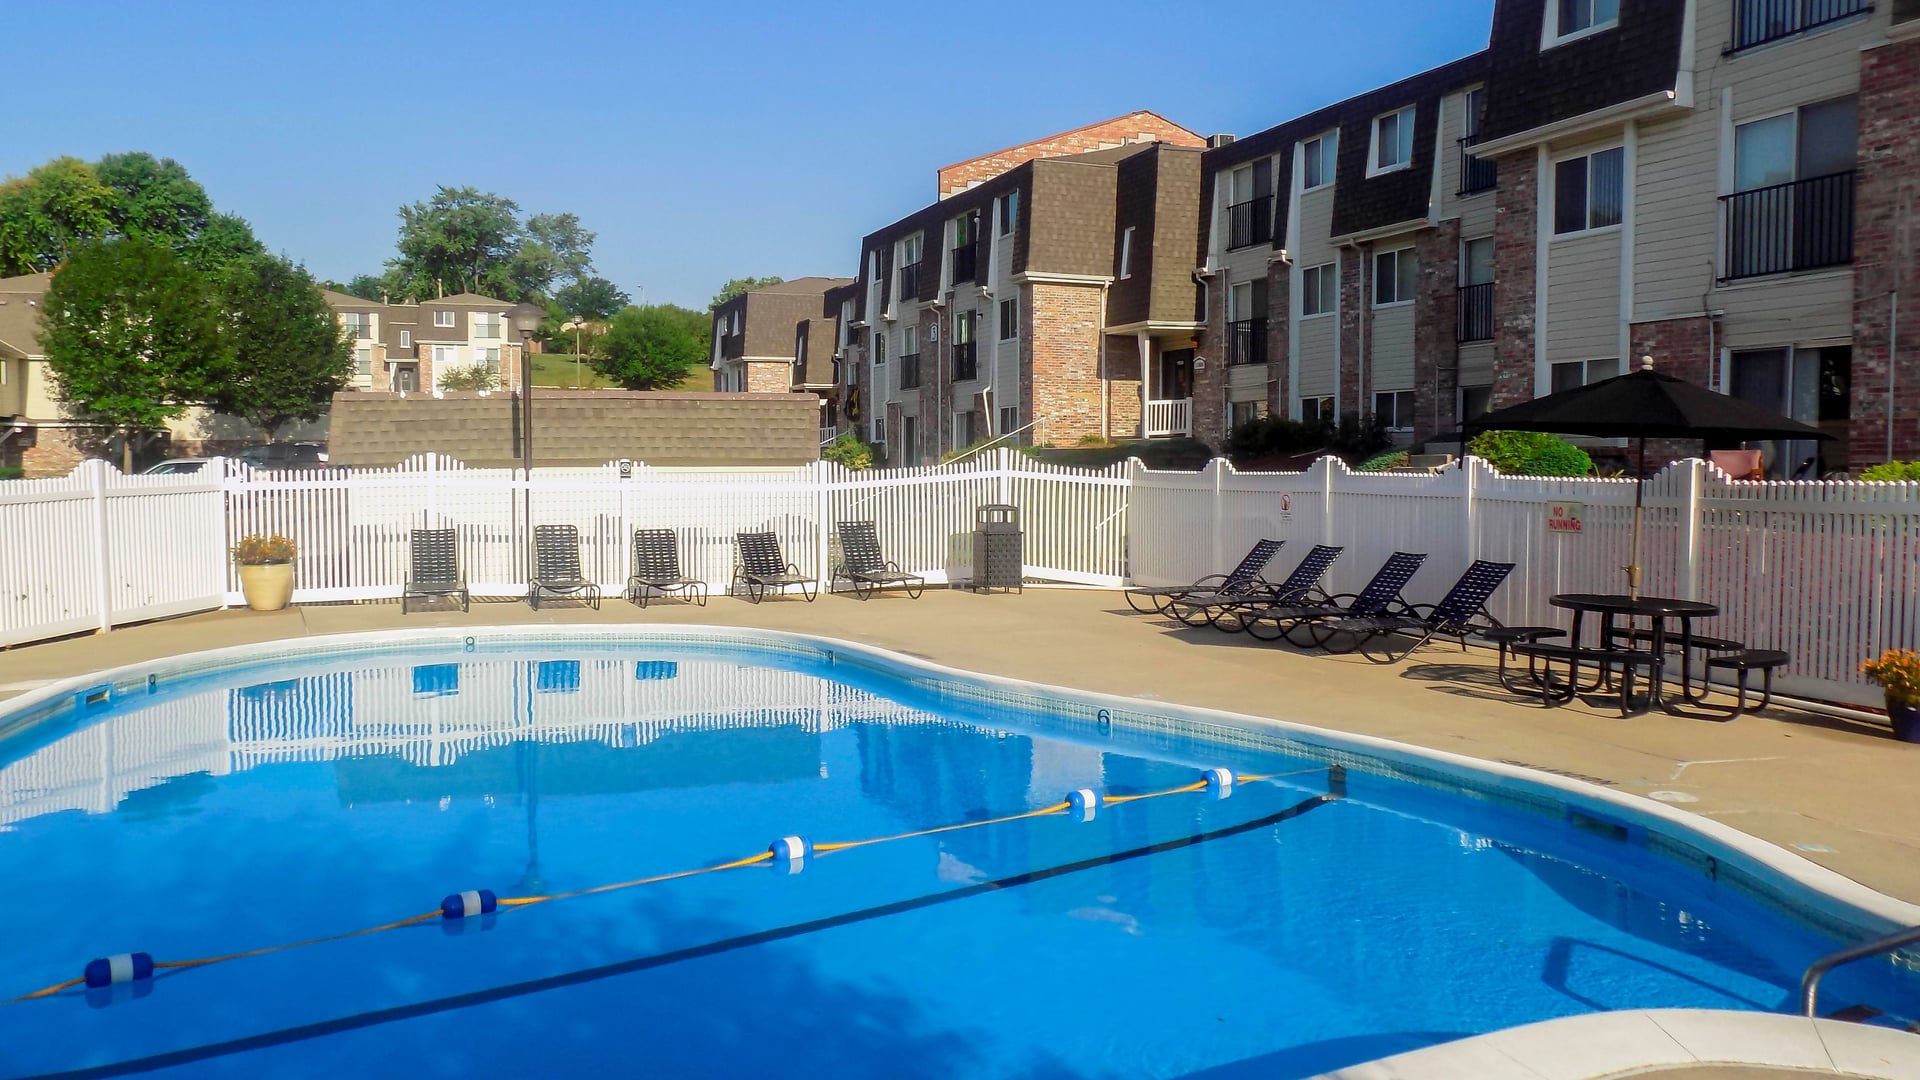 392 Apartments For Rent In Omaha Ne Page 5 Apartmentratings C